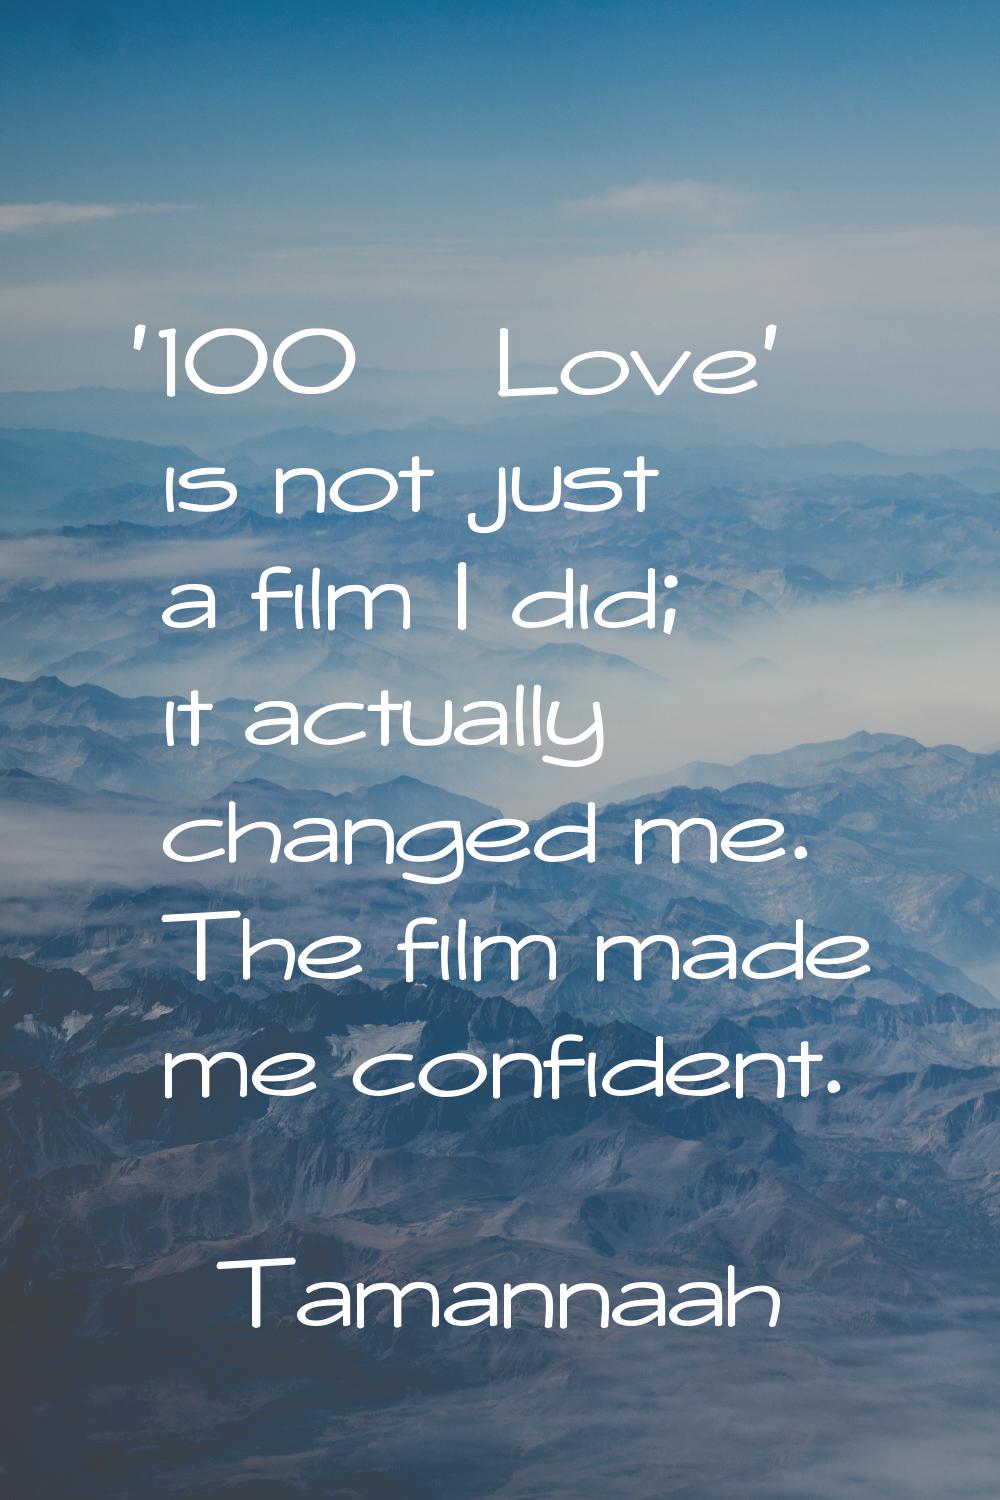 '100% Love' is not just a film I did; it actually changed me. The film made me confident.